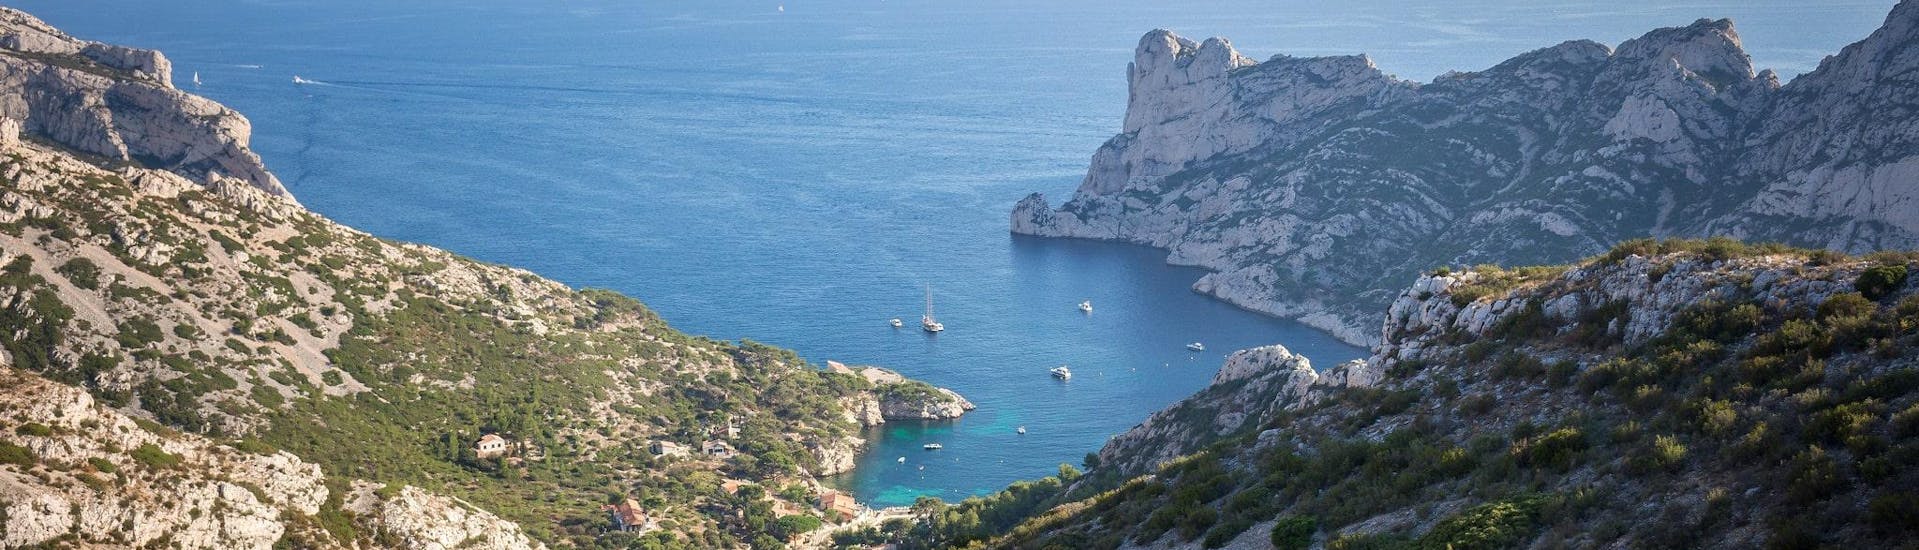 View over the Calanque of Sourmiou, which is a popular destination for boat trips in the Calanques National Park.